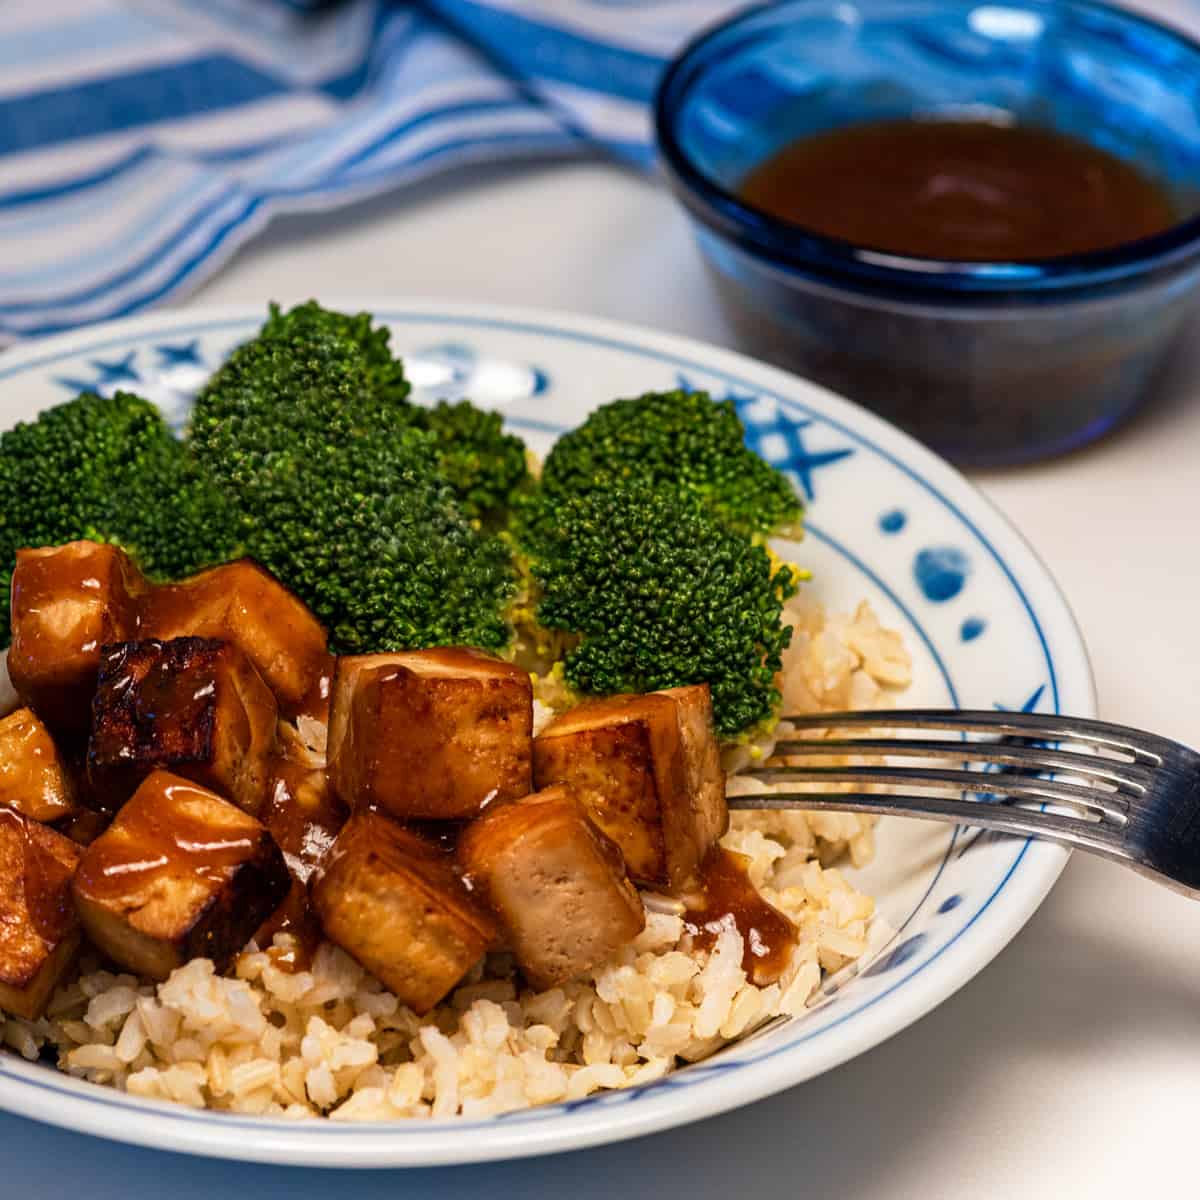 A dish of sesame soy marinated baked tofu with rice and broccoli.